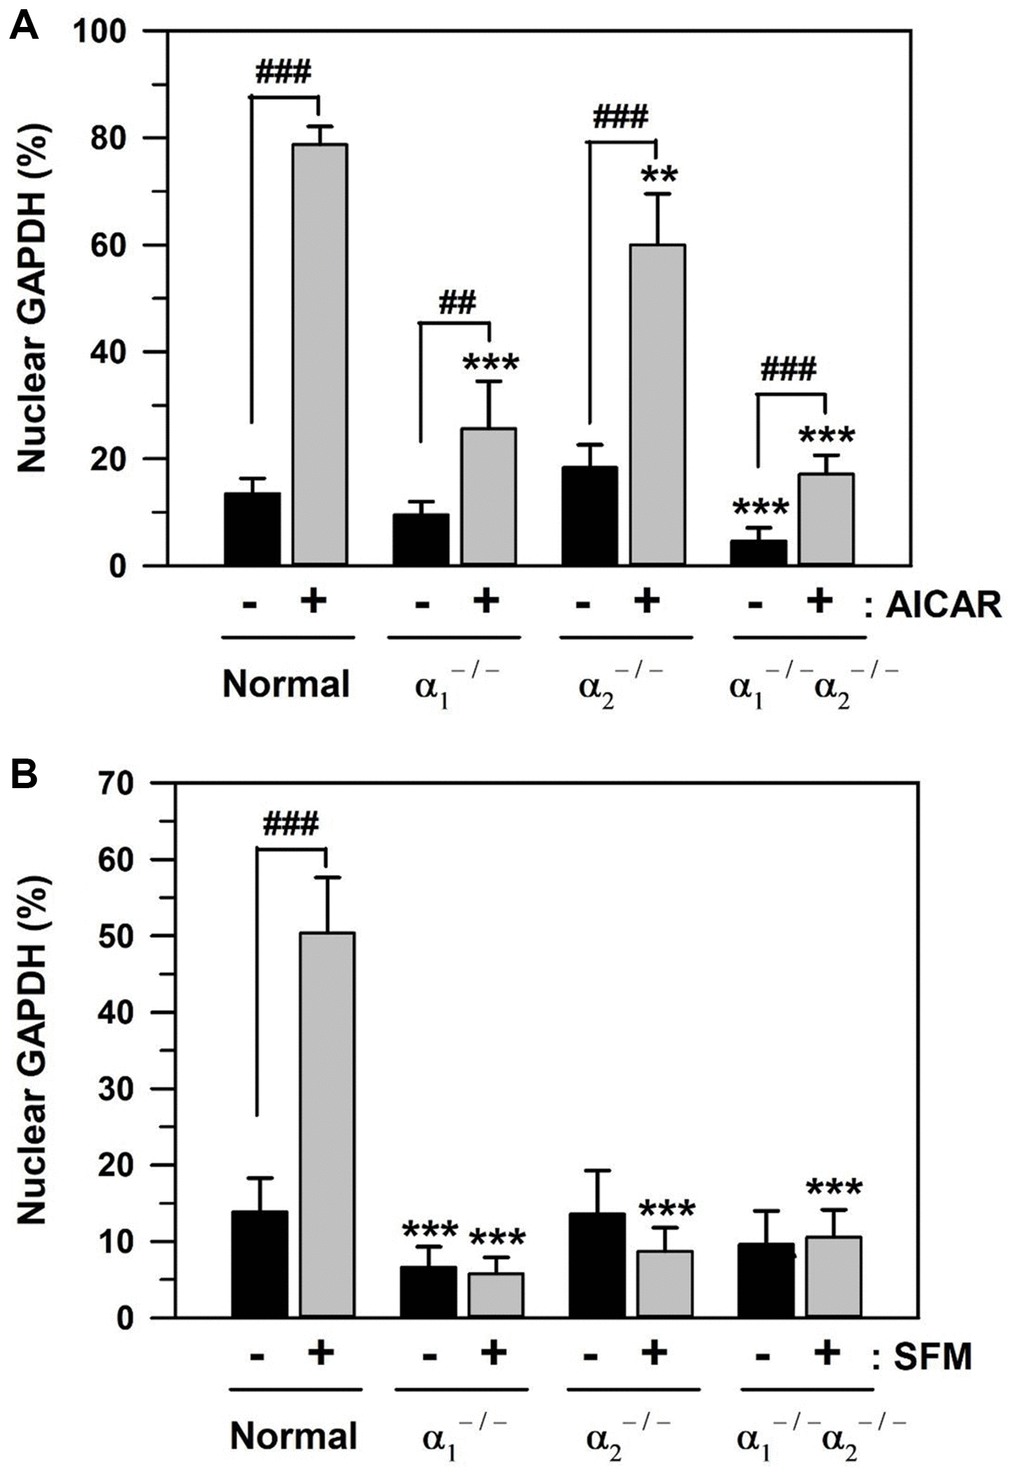 AICAR- and SFM-induced GAPDH translocation in AMPKα-knockout MEFs. (A and B) Normal and AMPKα-null MEF cells (AMPKα1−/−, AMPKα2−/−, and AMPKα1−/−/α2−/−) were cultured in 10% FBS medium for 2 days and then treated with 1 mM AICAR (A) or SFM (B) for 2 days. Cells were immunostained with a GAPDH-specific antibody and analyzed by confocal laser scanning microscopy. The number of cells having nuclear GAPDH with or without cytosolic GAPDH was counted, and the percentage distributions were calculated (n = 10 and 20 for total replicates in A and B, respectively) and plotted as means +/− standard deviations. **p ***p ##p ###p 